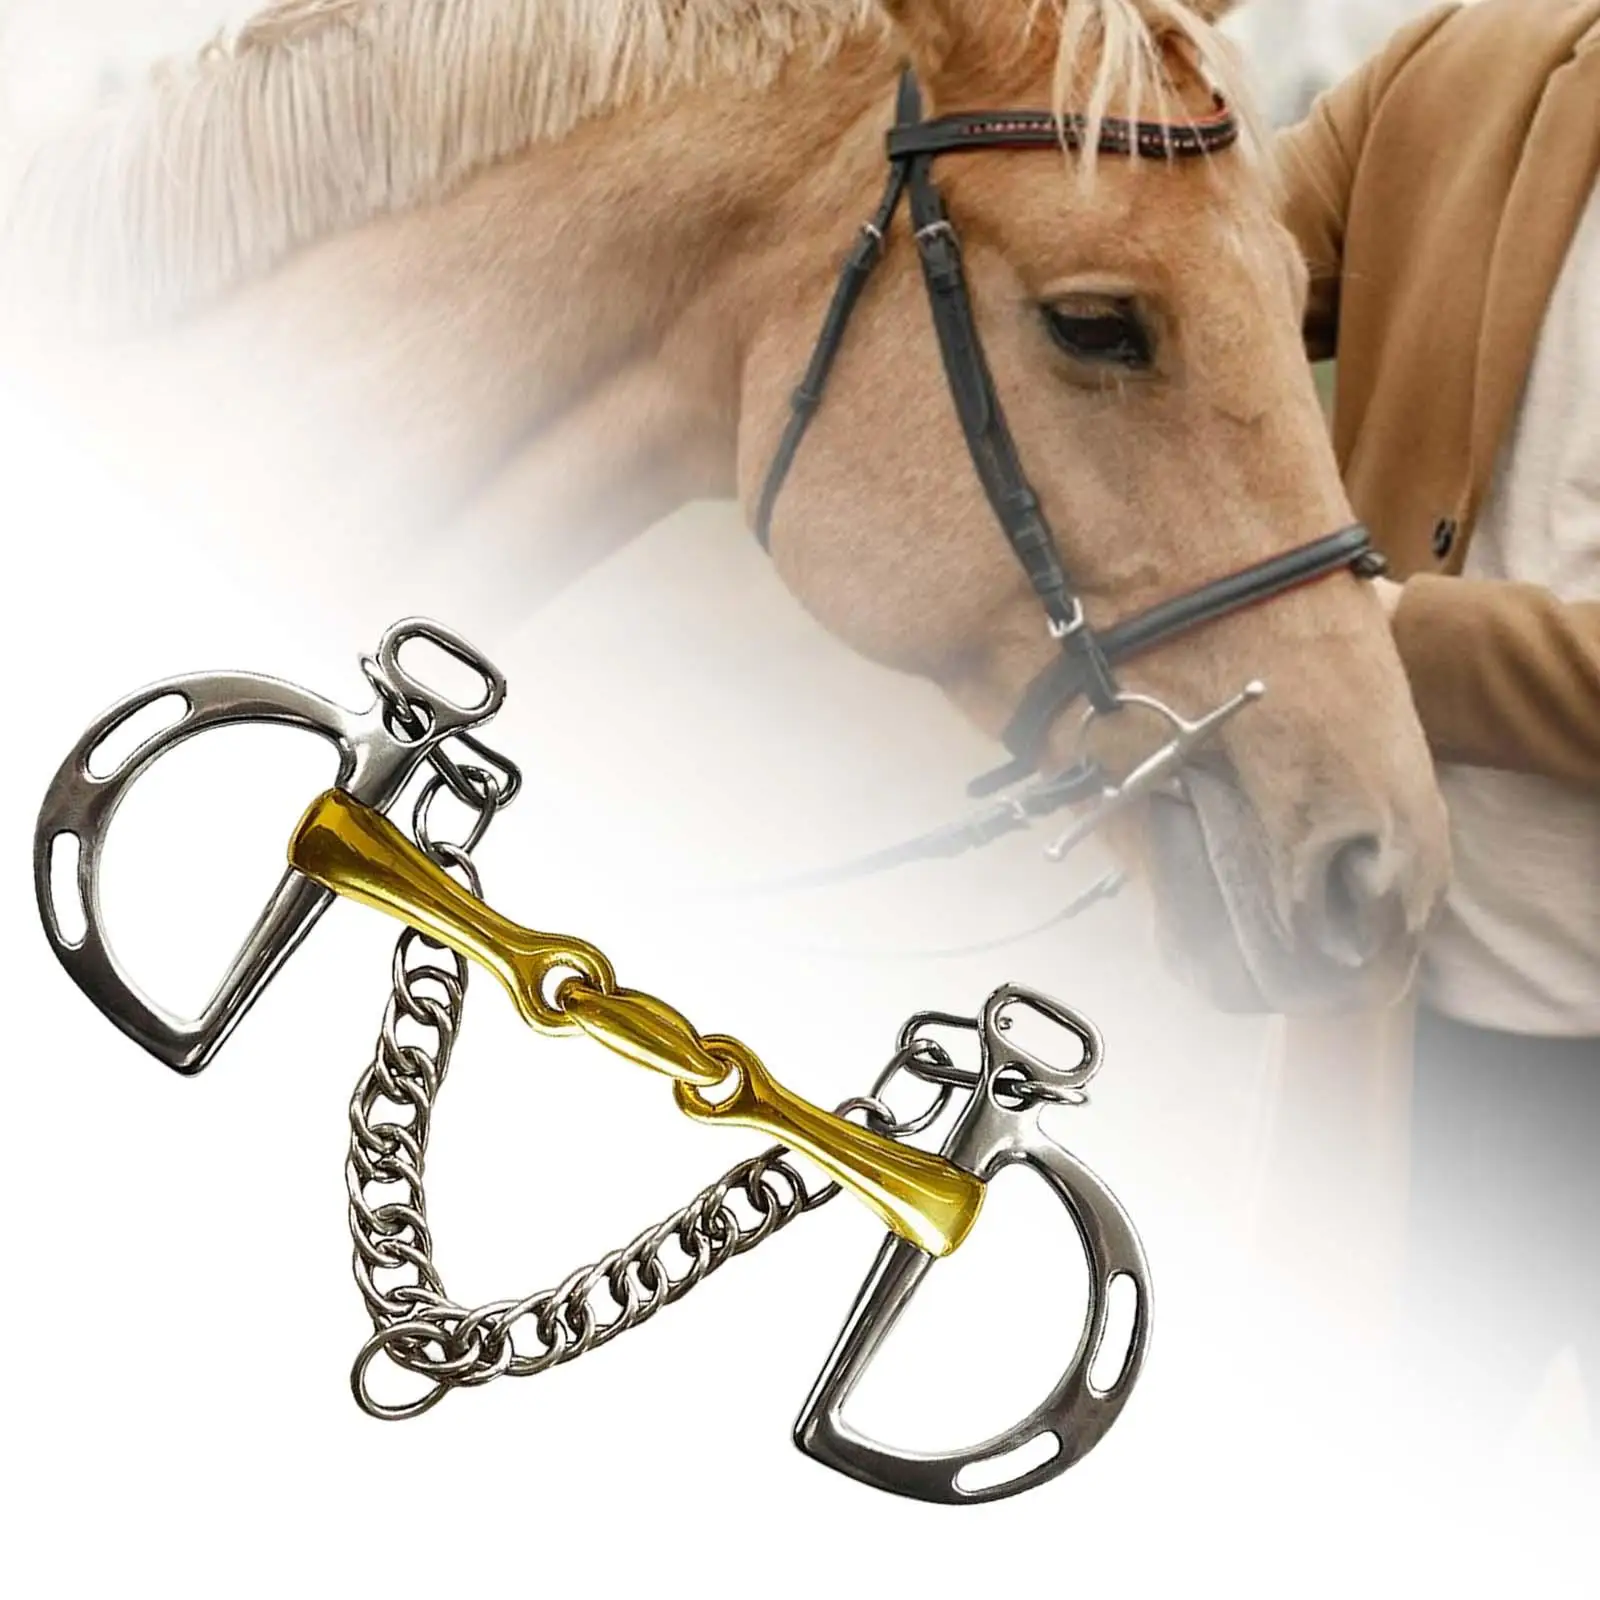 Horse Bit , Copper Mouth Horse Gag Bit with Curb Hook Chain, Copper Roller Cheek Harness, for